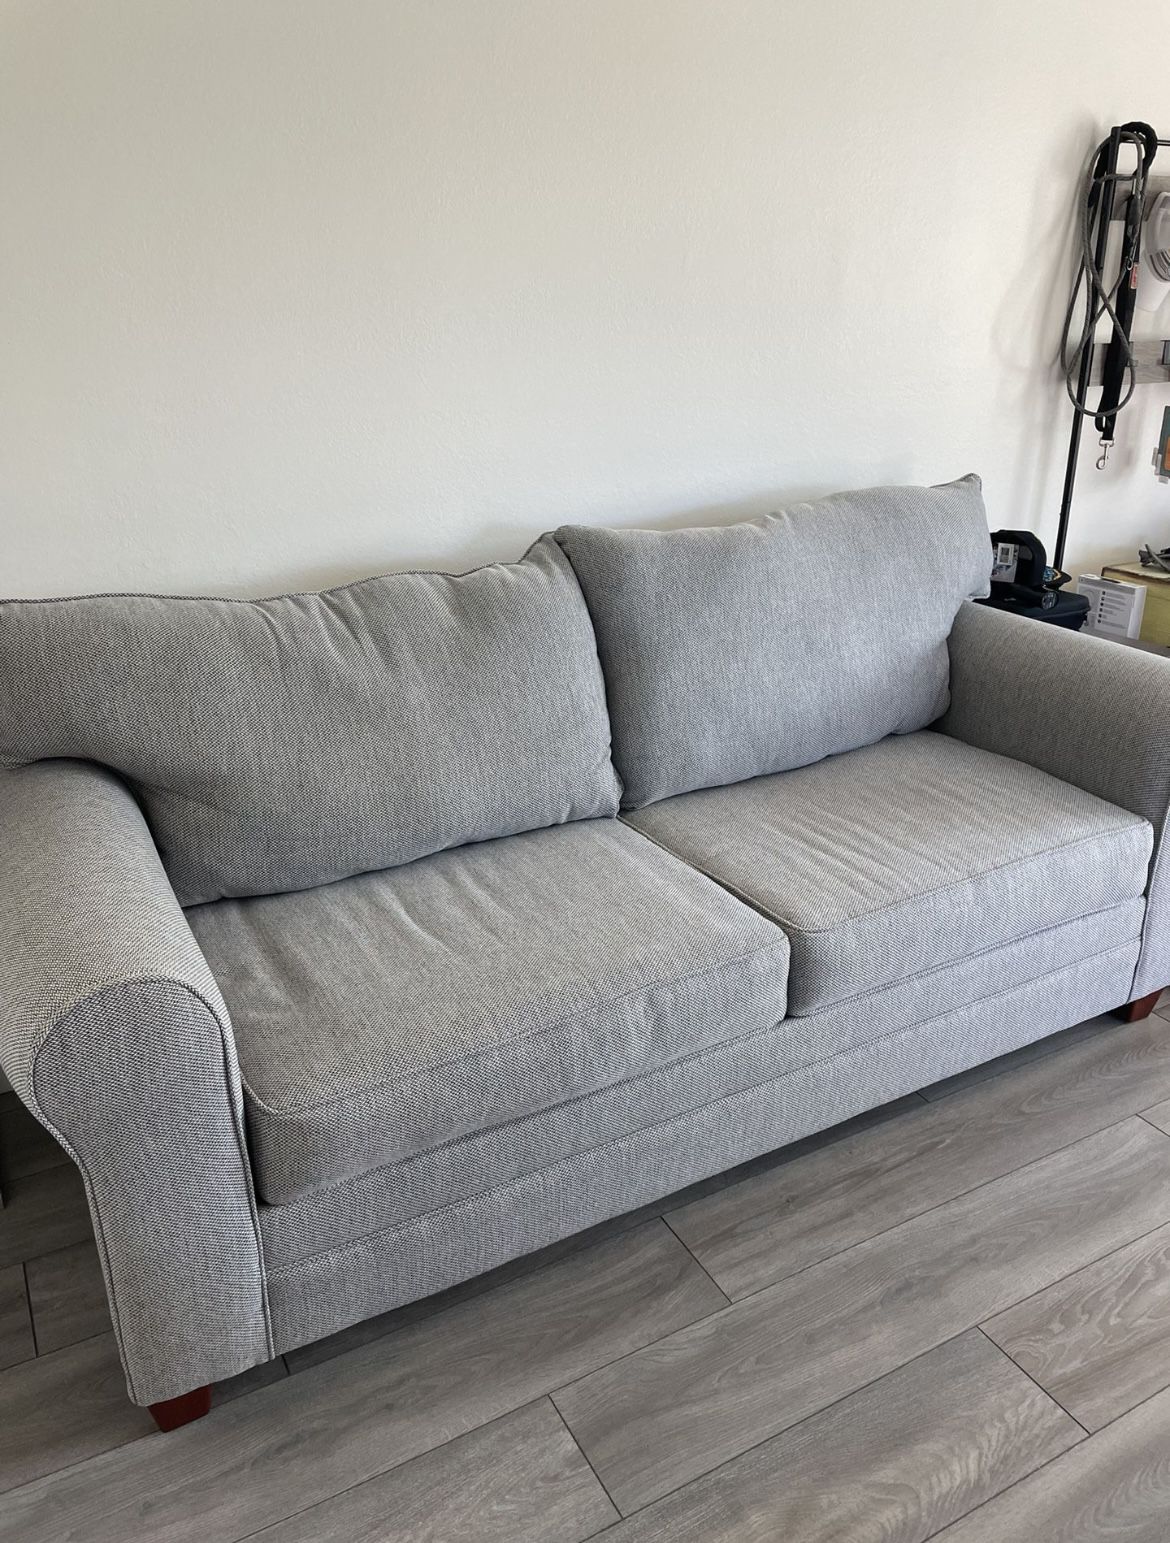 Bobs Discount Furniture Fold Out Couch